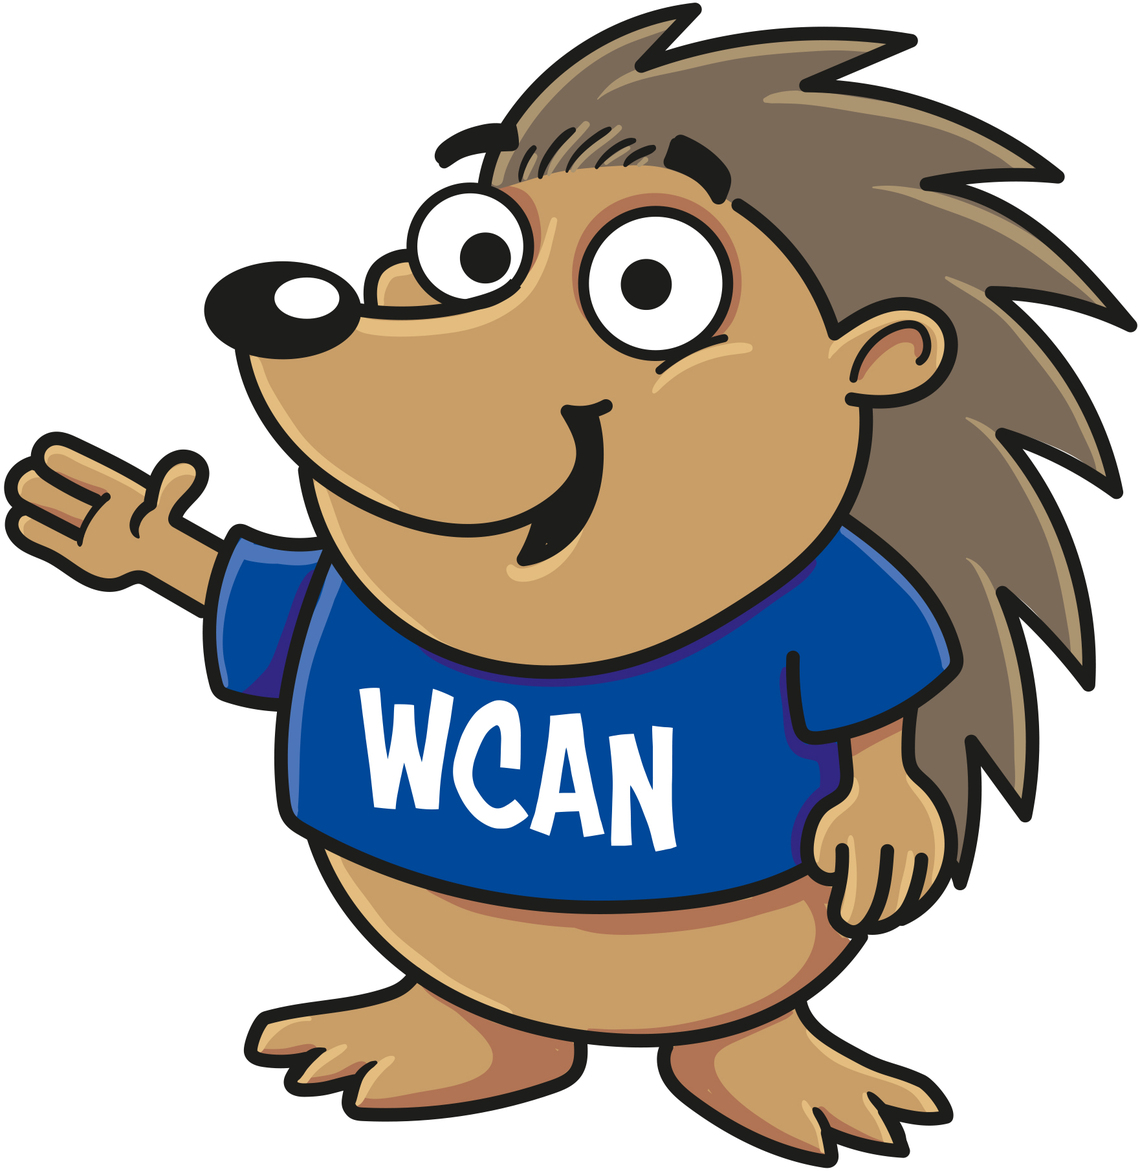 Cartoon Hedgehog with WCAN written on the front of their t-shirt